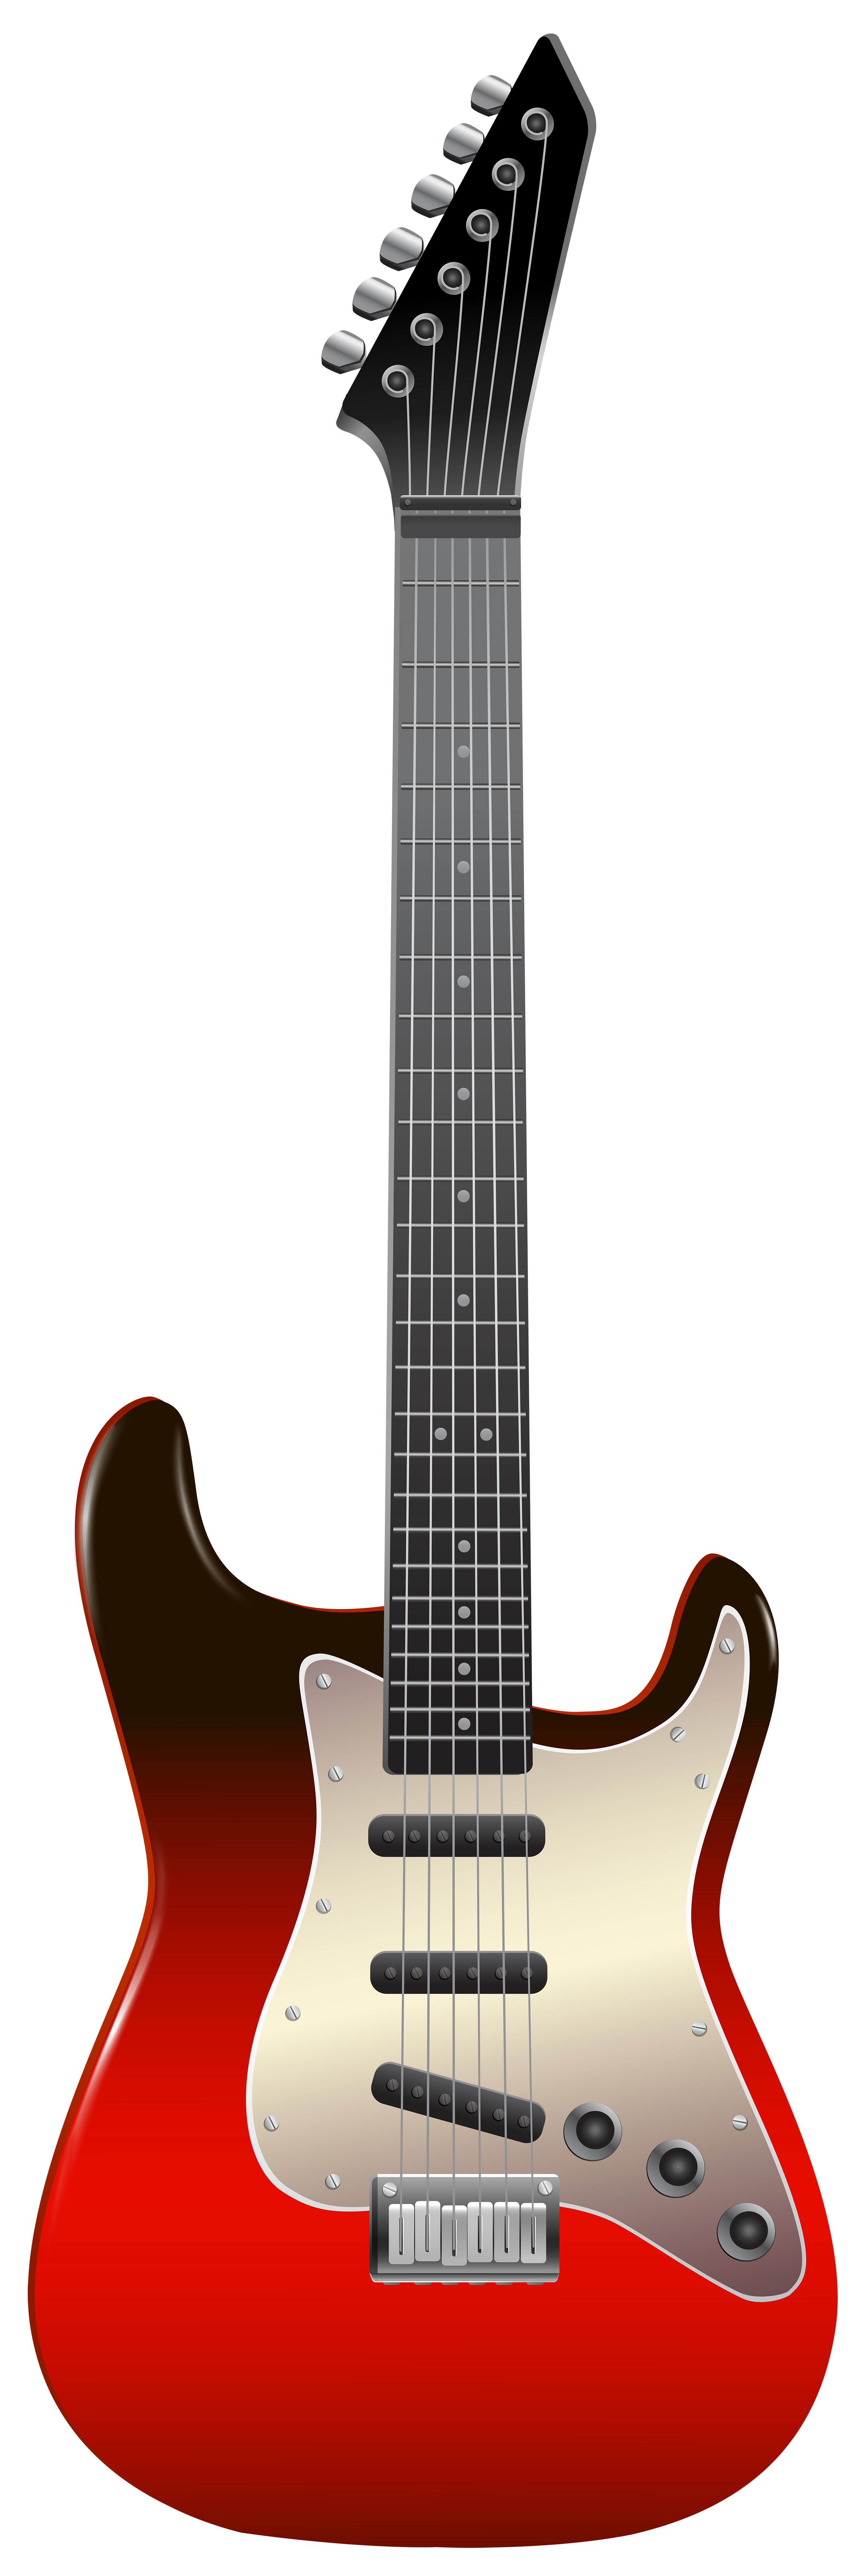 Bass Instruments Guitar Electric Musical Outline Clipart